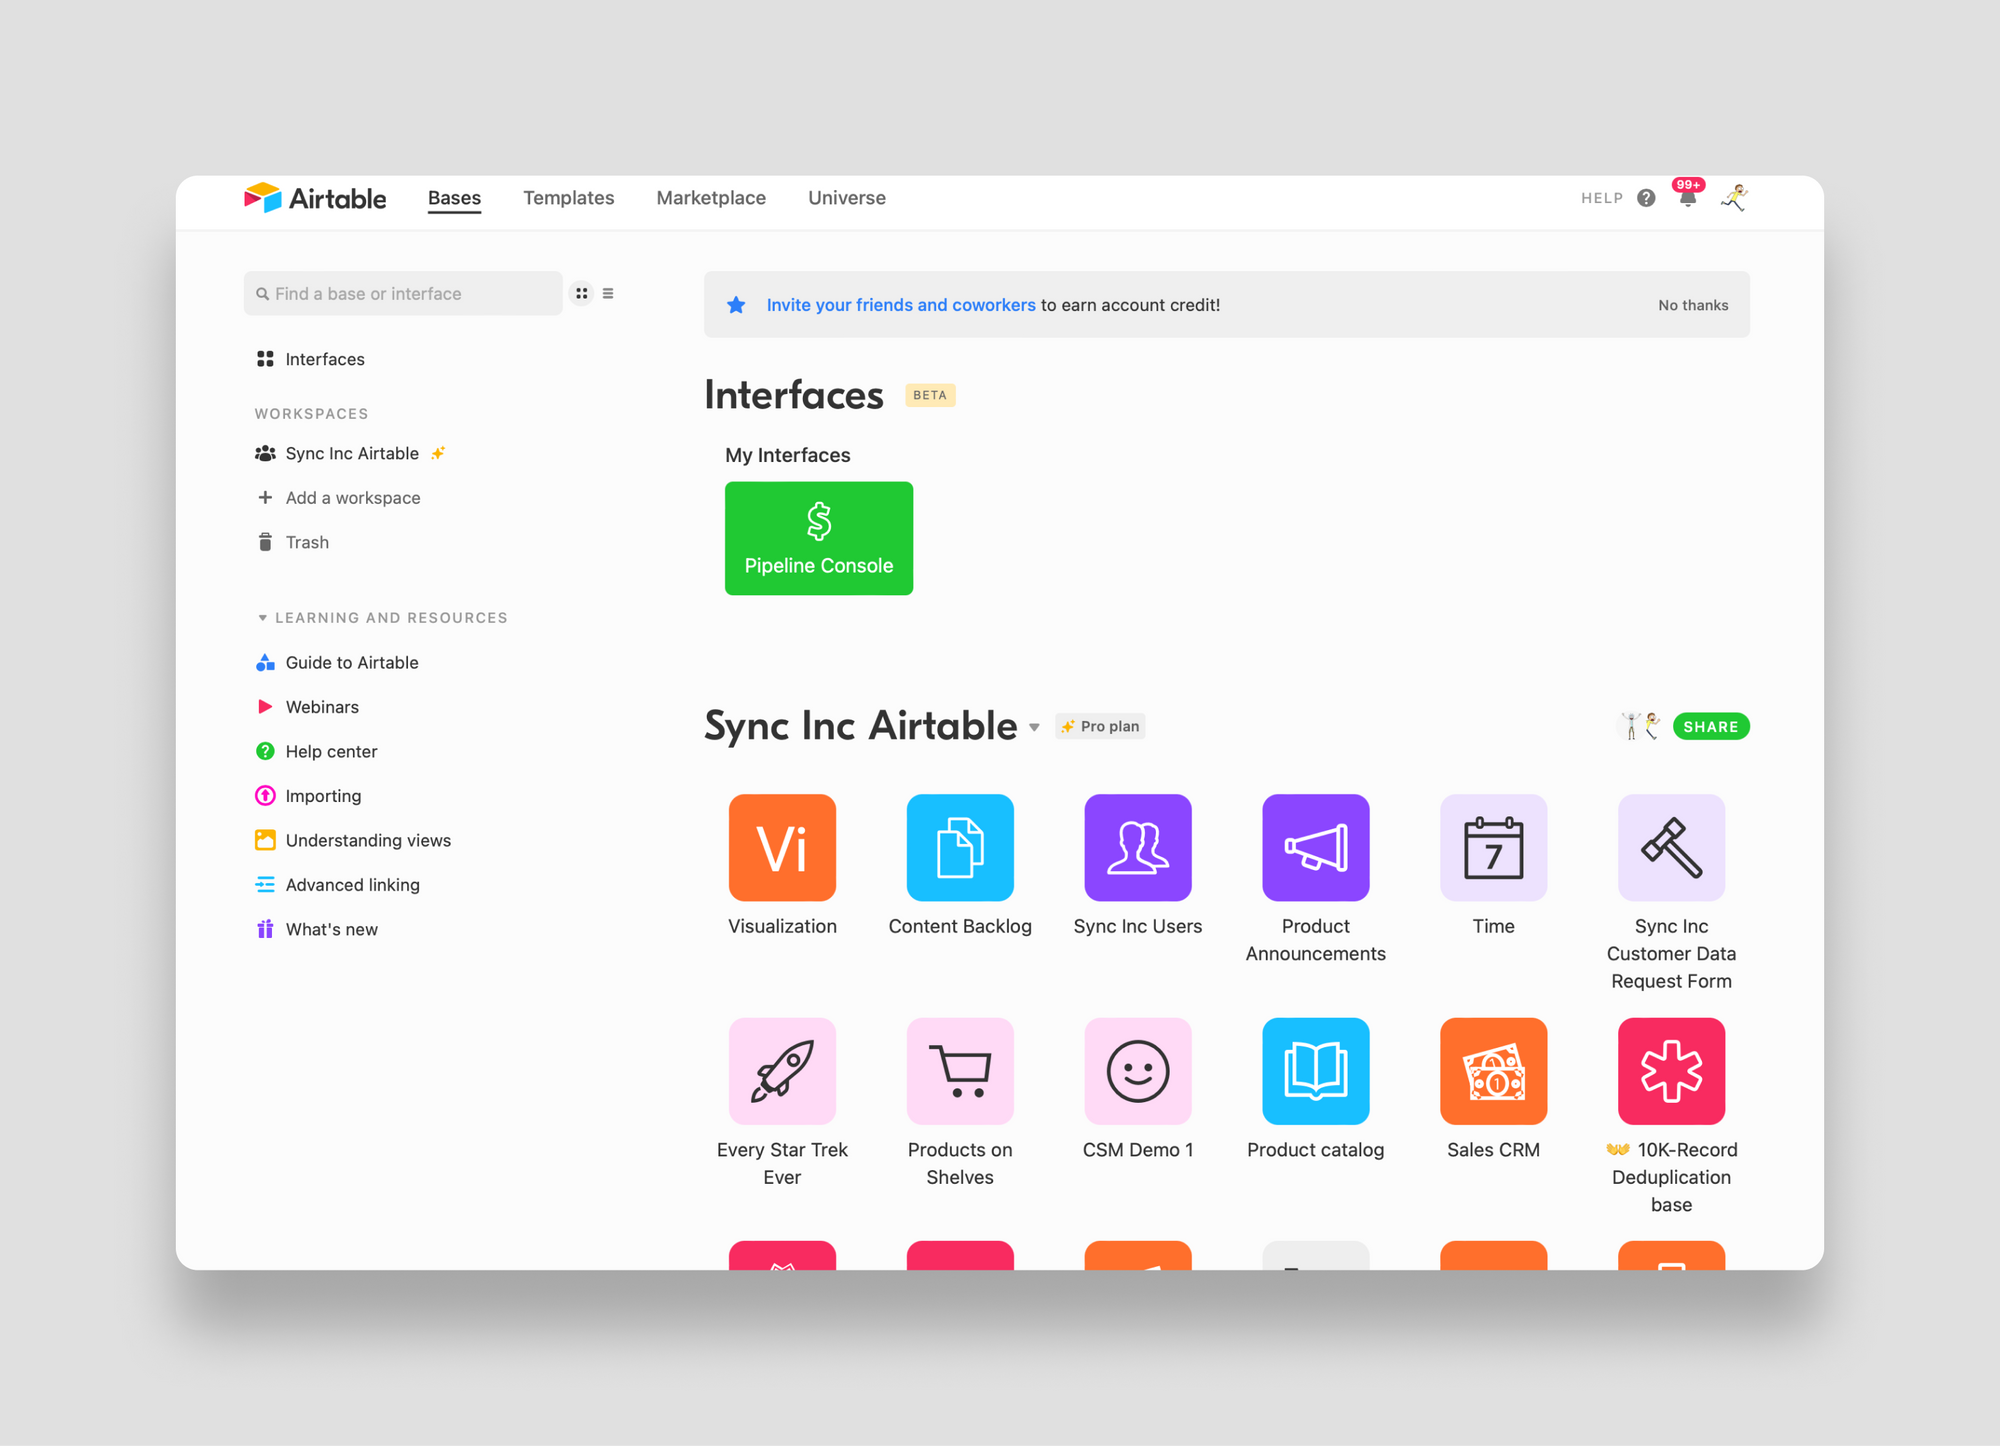 Access the interface from the Airtable landing page